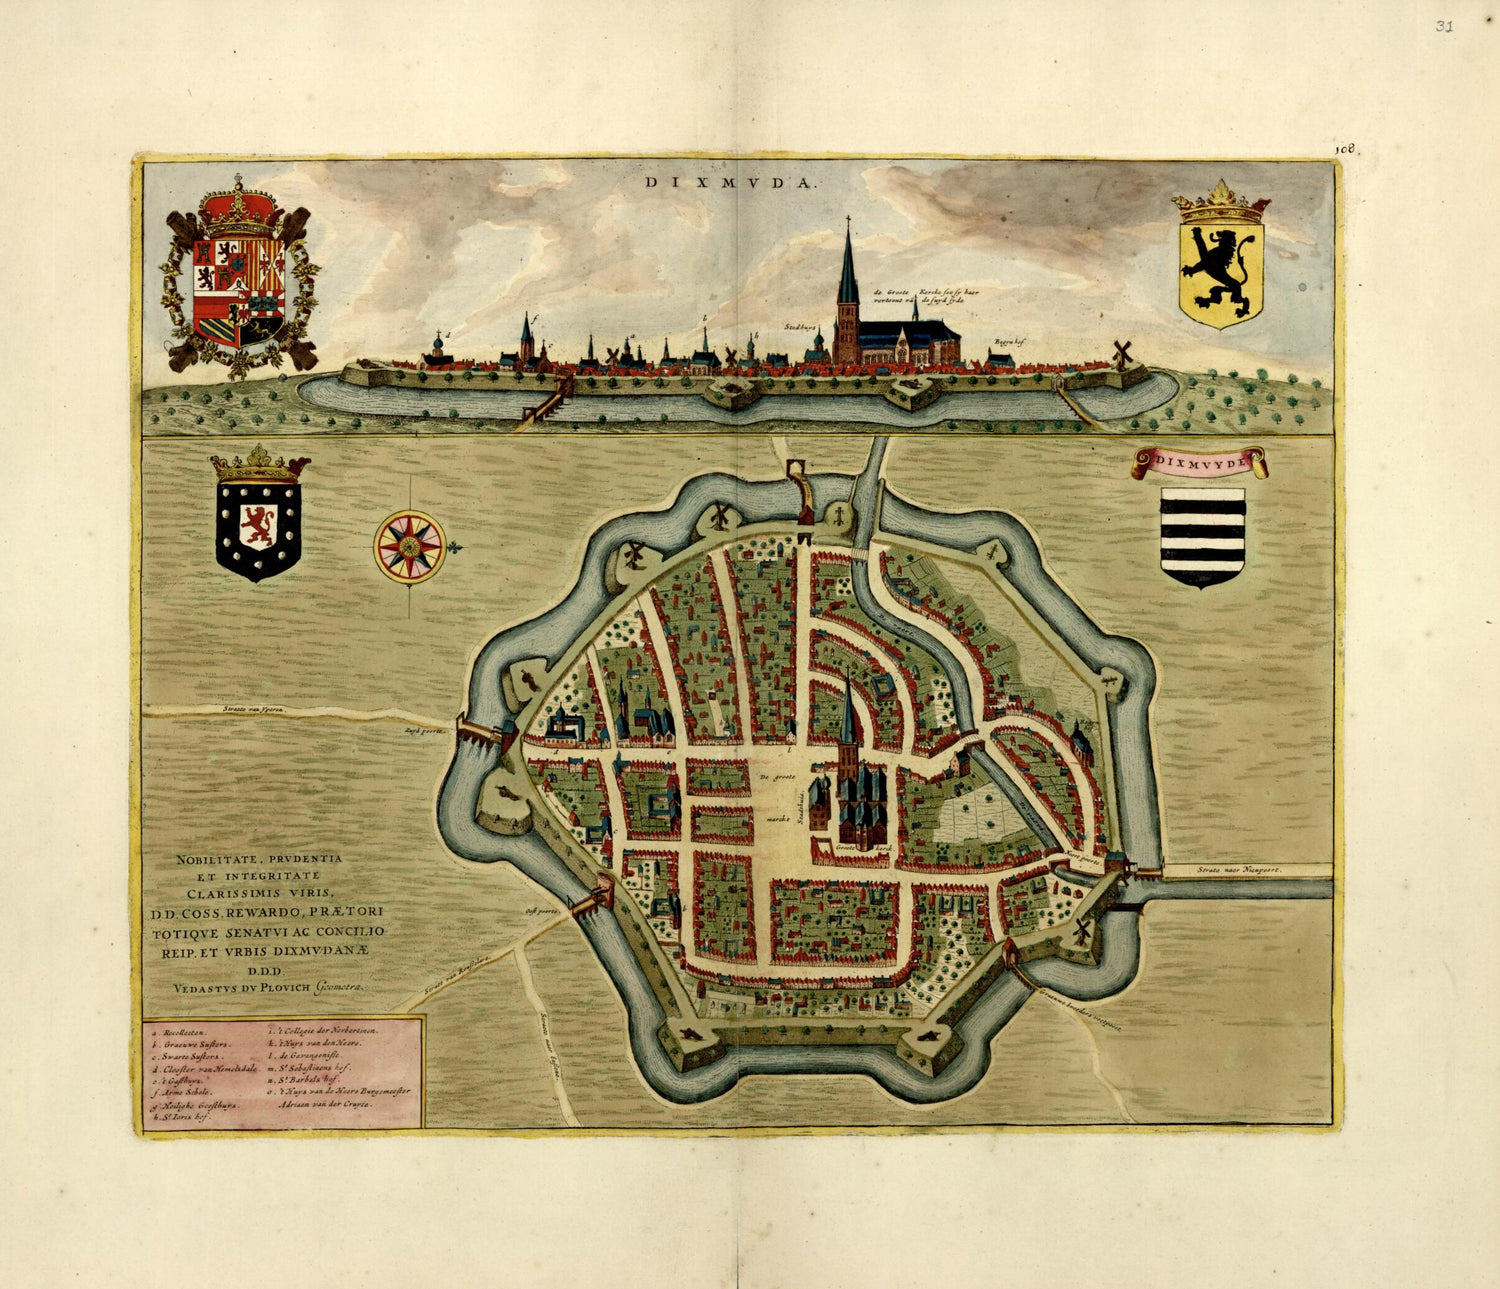 This old map of Dixmvda from a Collection of Plans of Fortifications and Battles, 1684-from 1709 from 1709 was created by Anna Beeck in 1709